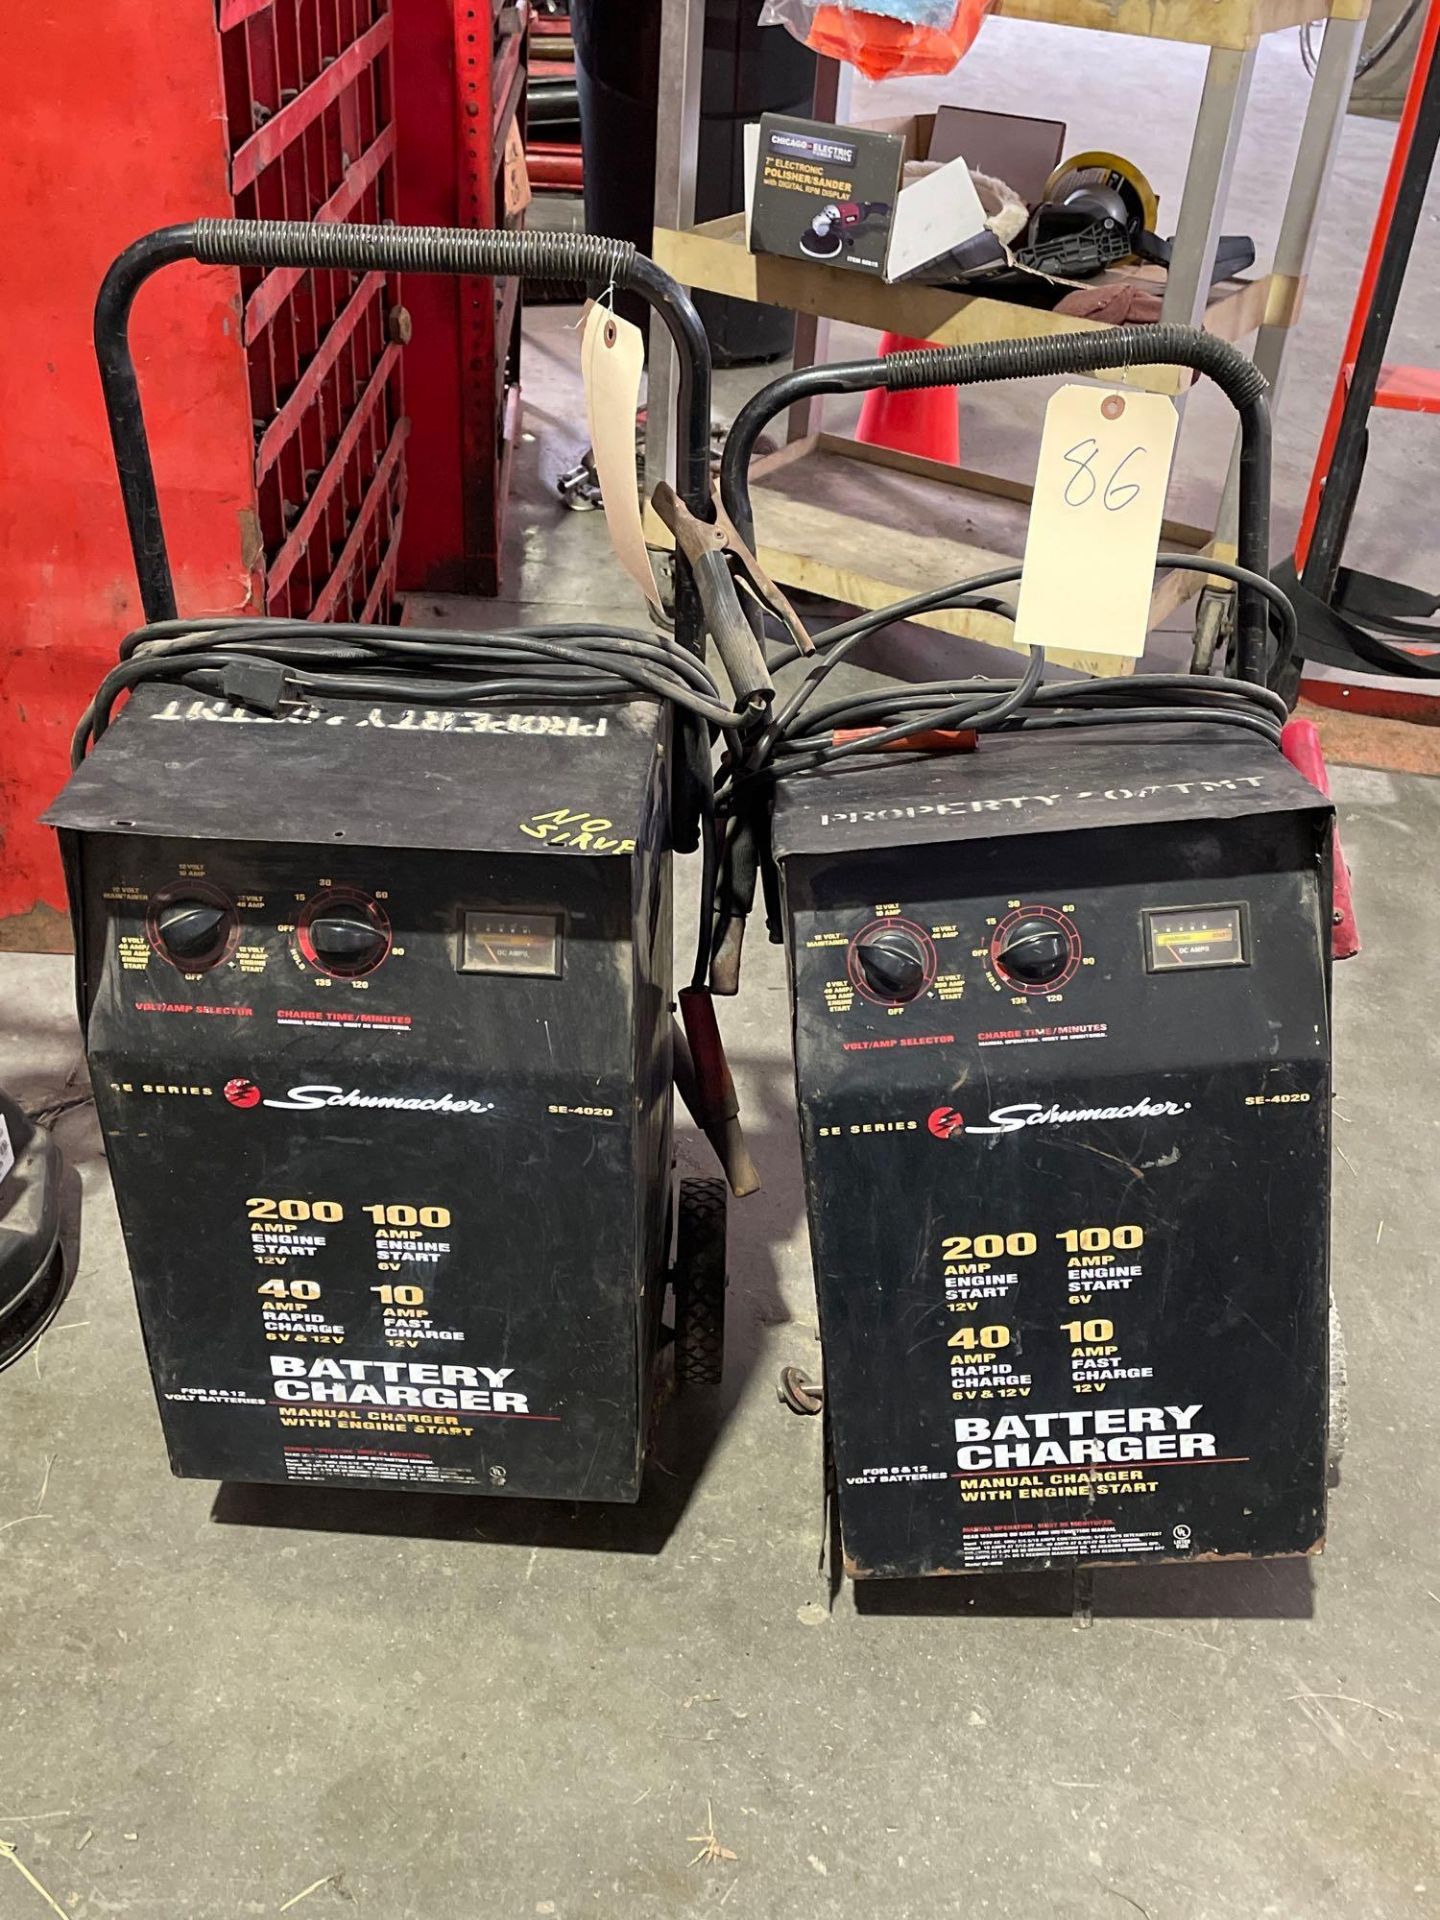 Lot of 2: Schumacher SE-4020 Battery Chargers